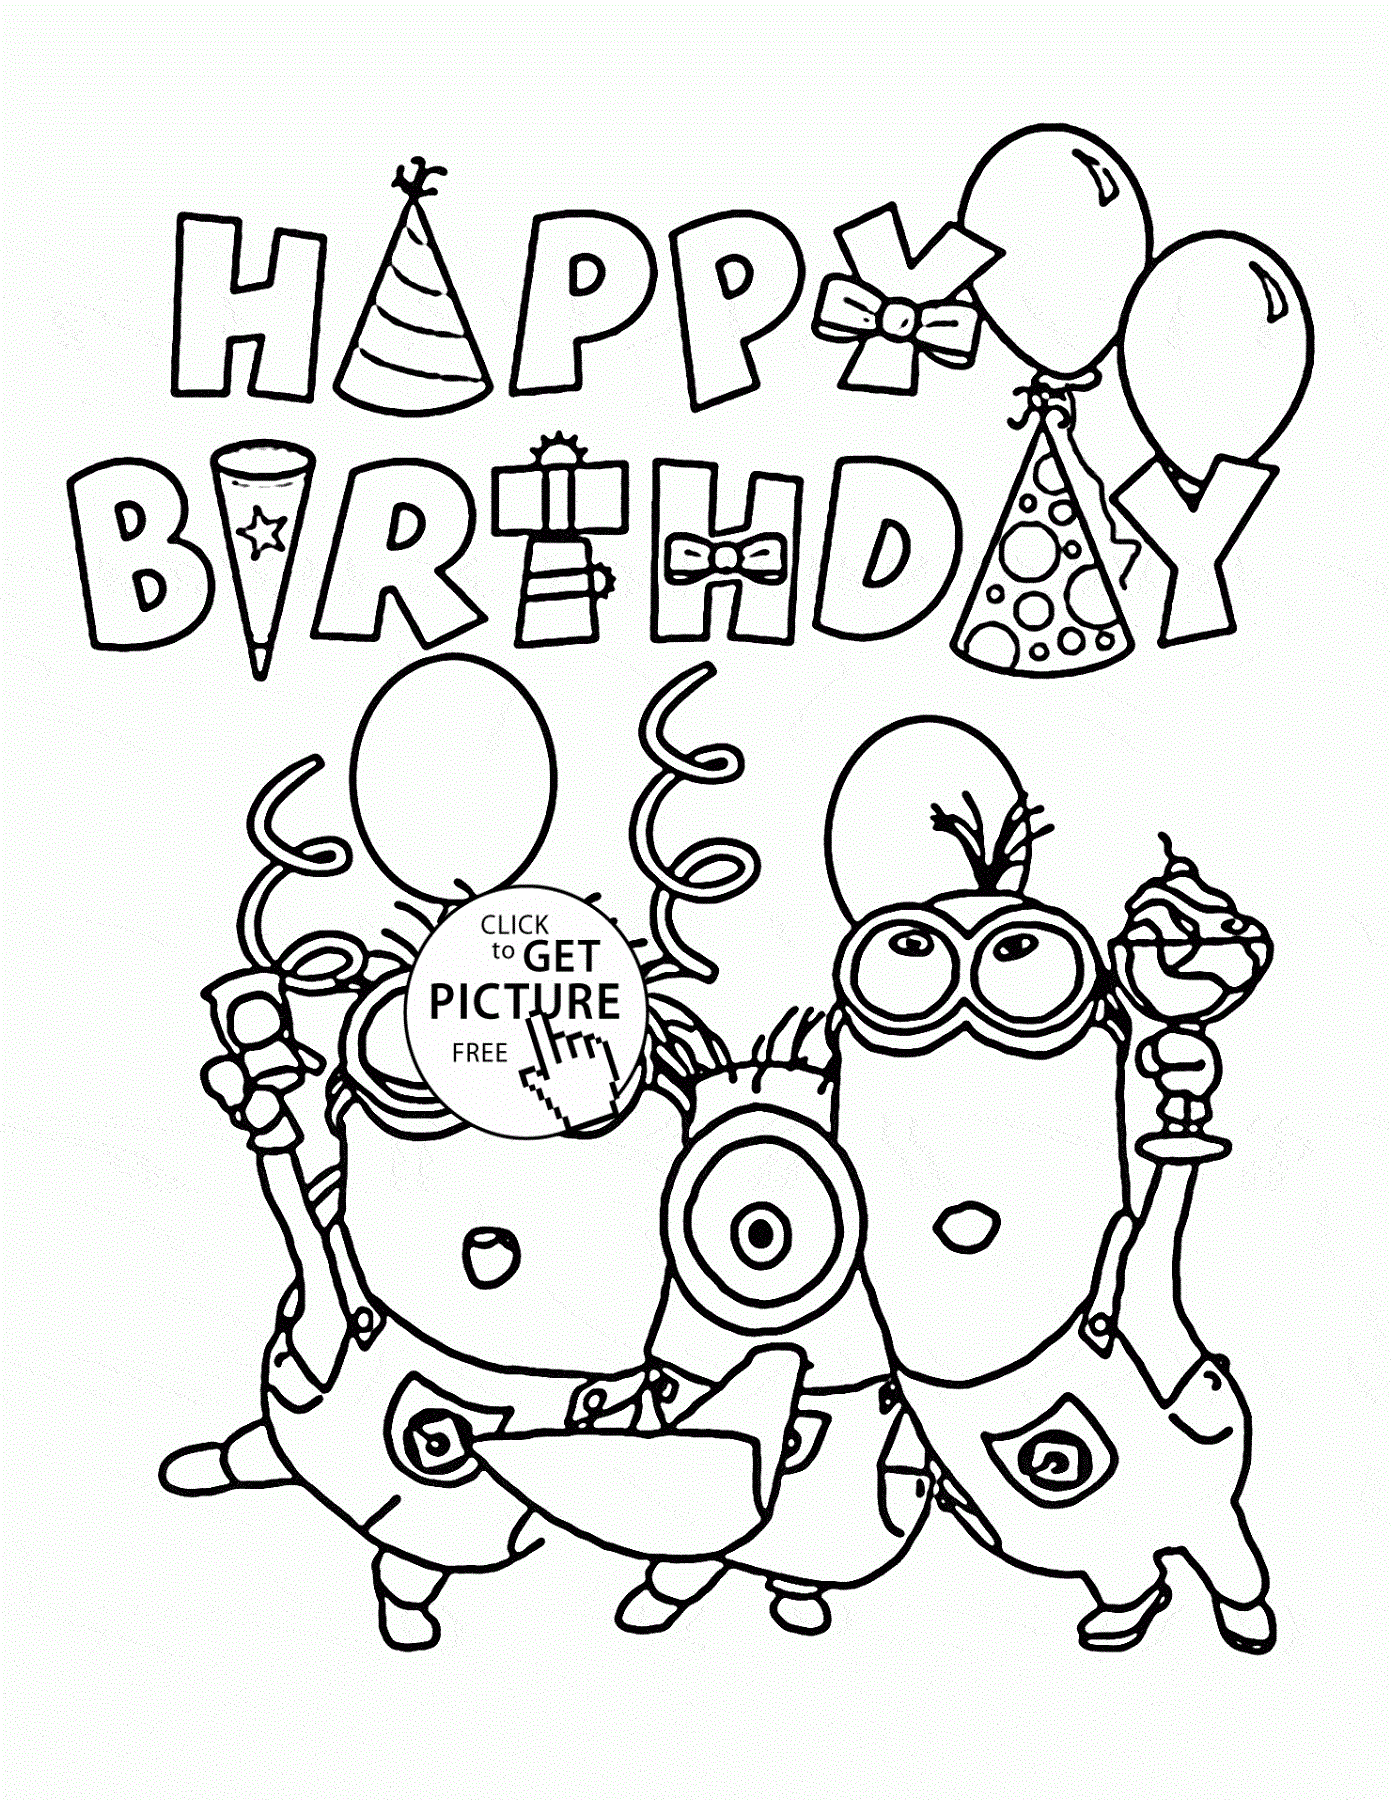 birthday-color-pages-minion